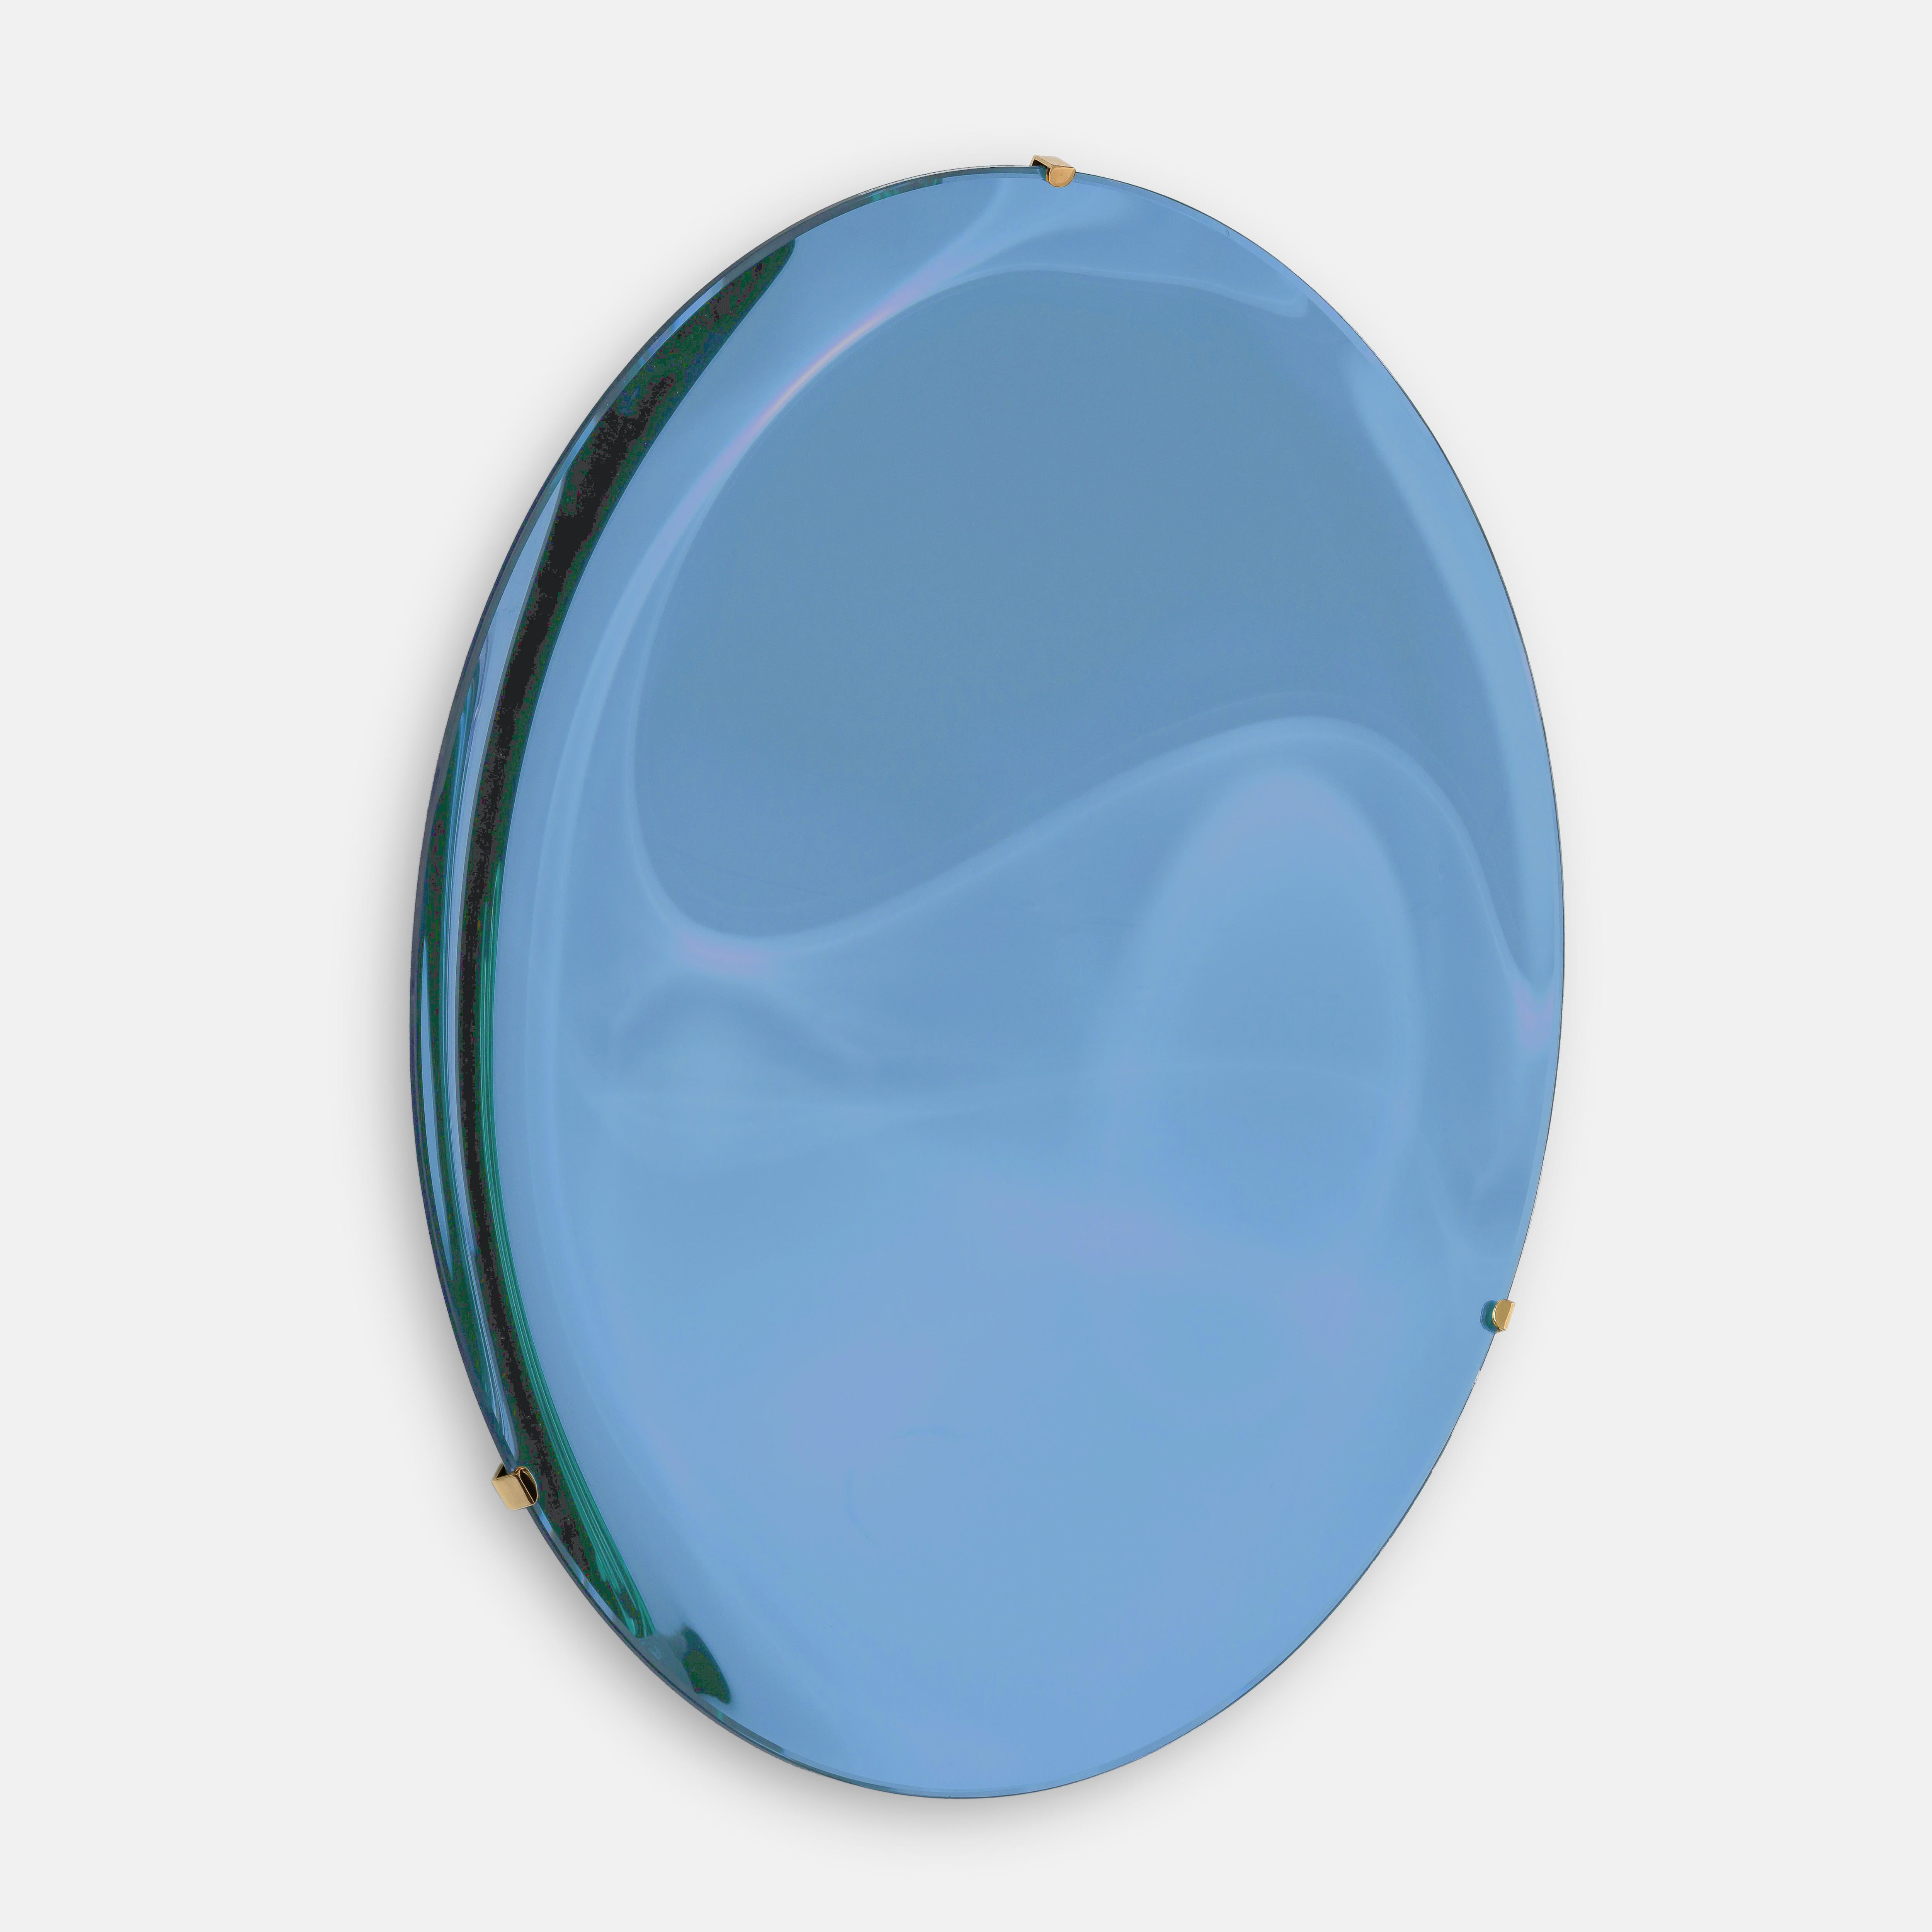 Silvered Effetto Vetro Contemporary Custom Sculptural Round Concave Mirror in China Blue For Sale